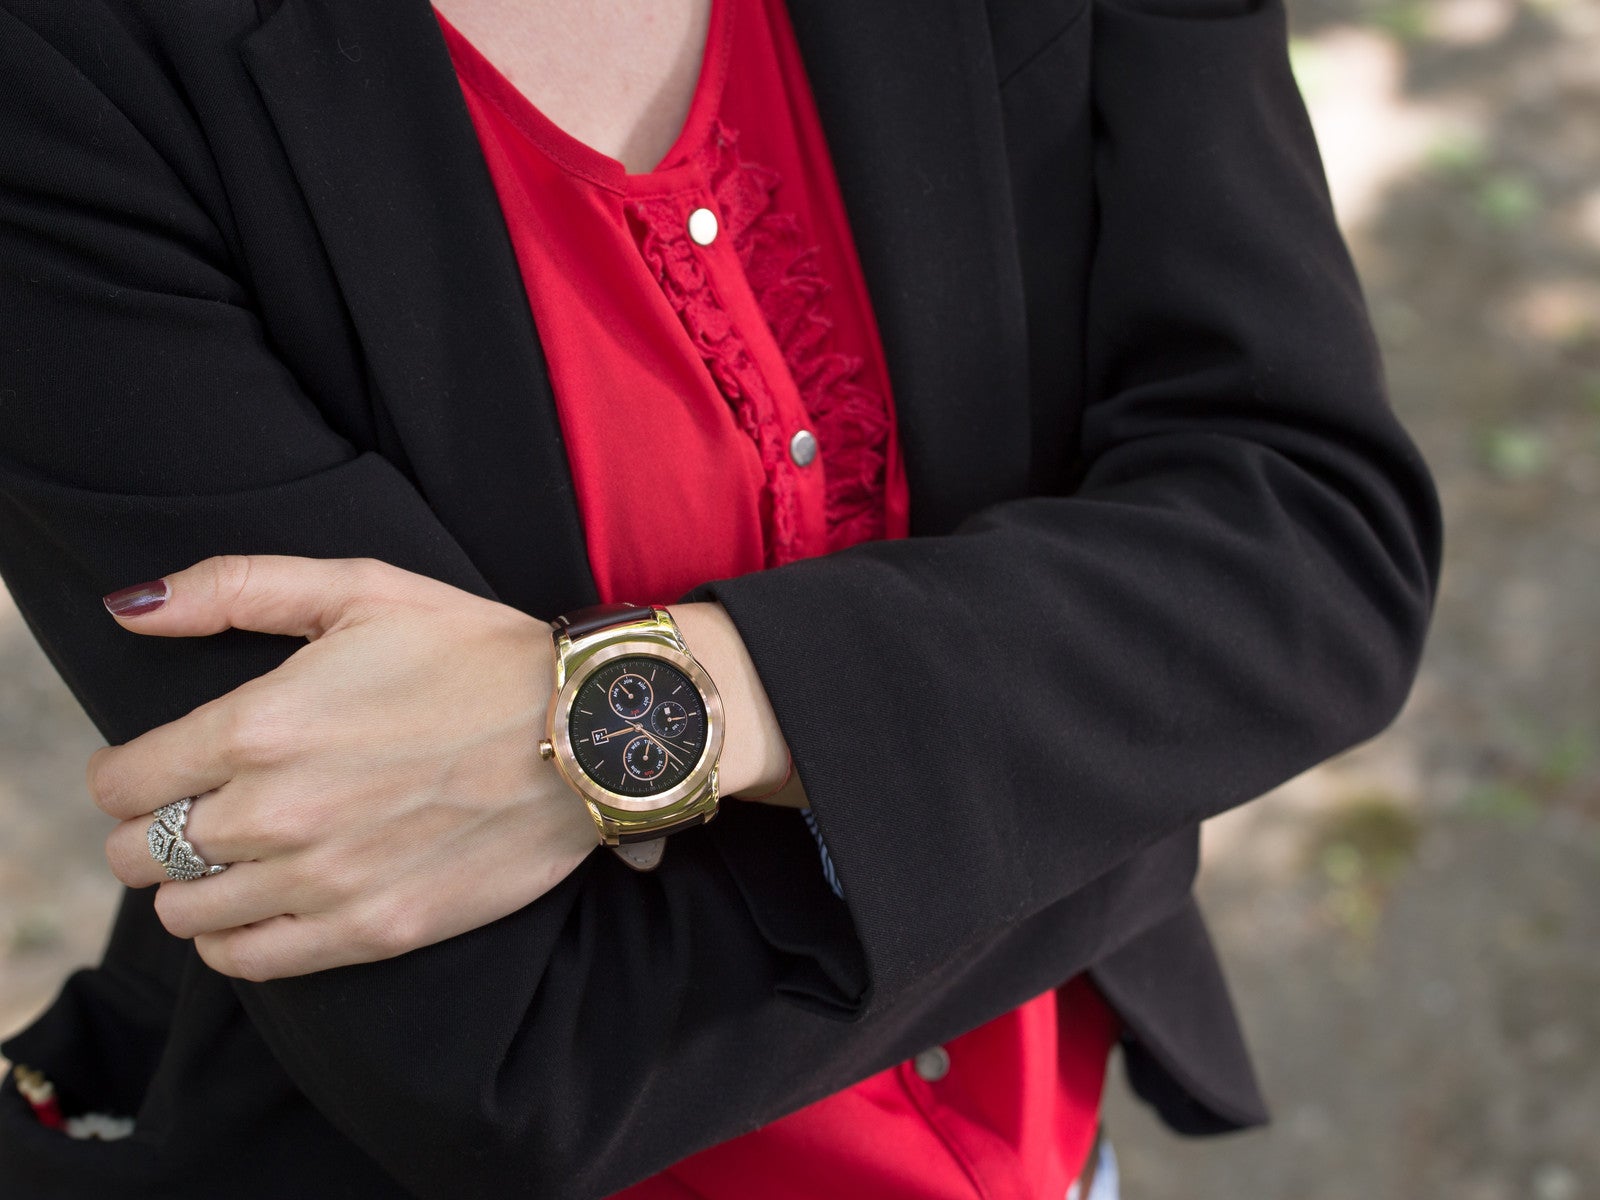 The LG Watch Urbane is a stylish timepiece, although its design might not appeal to ladies - H1 2015 in review: Best smartwatches